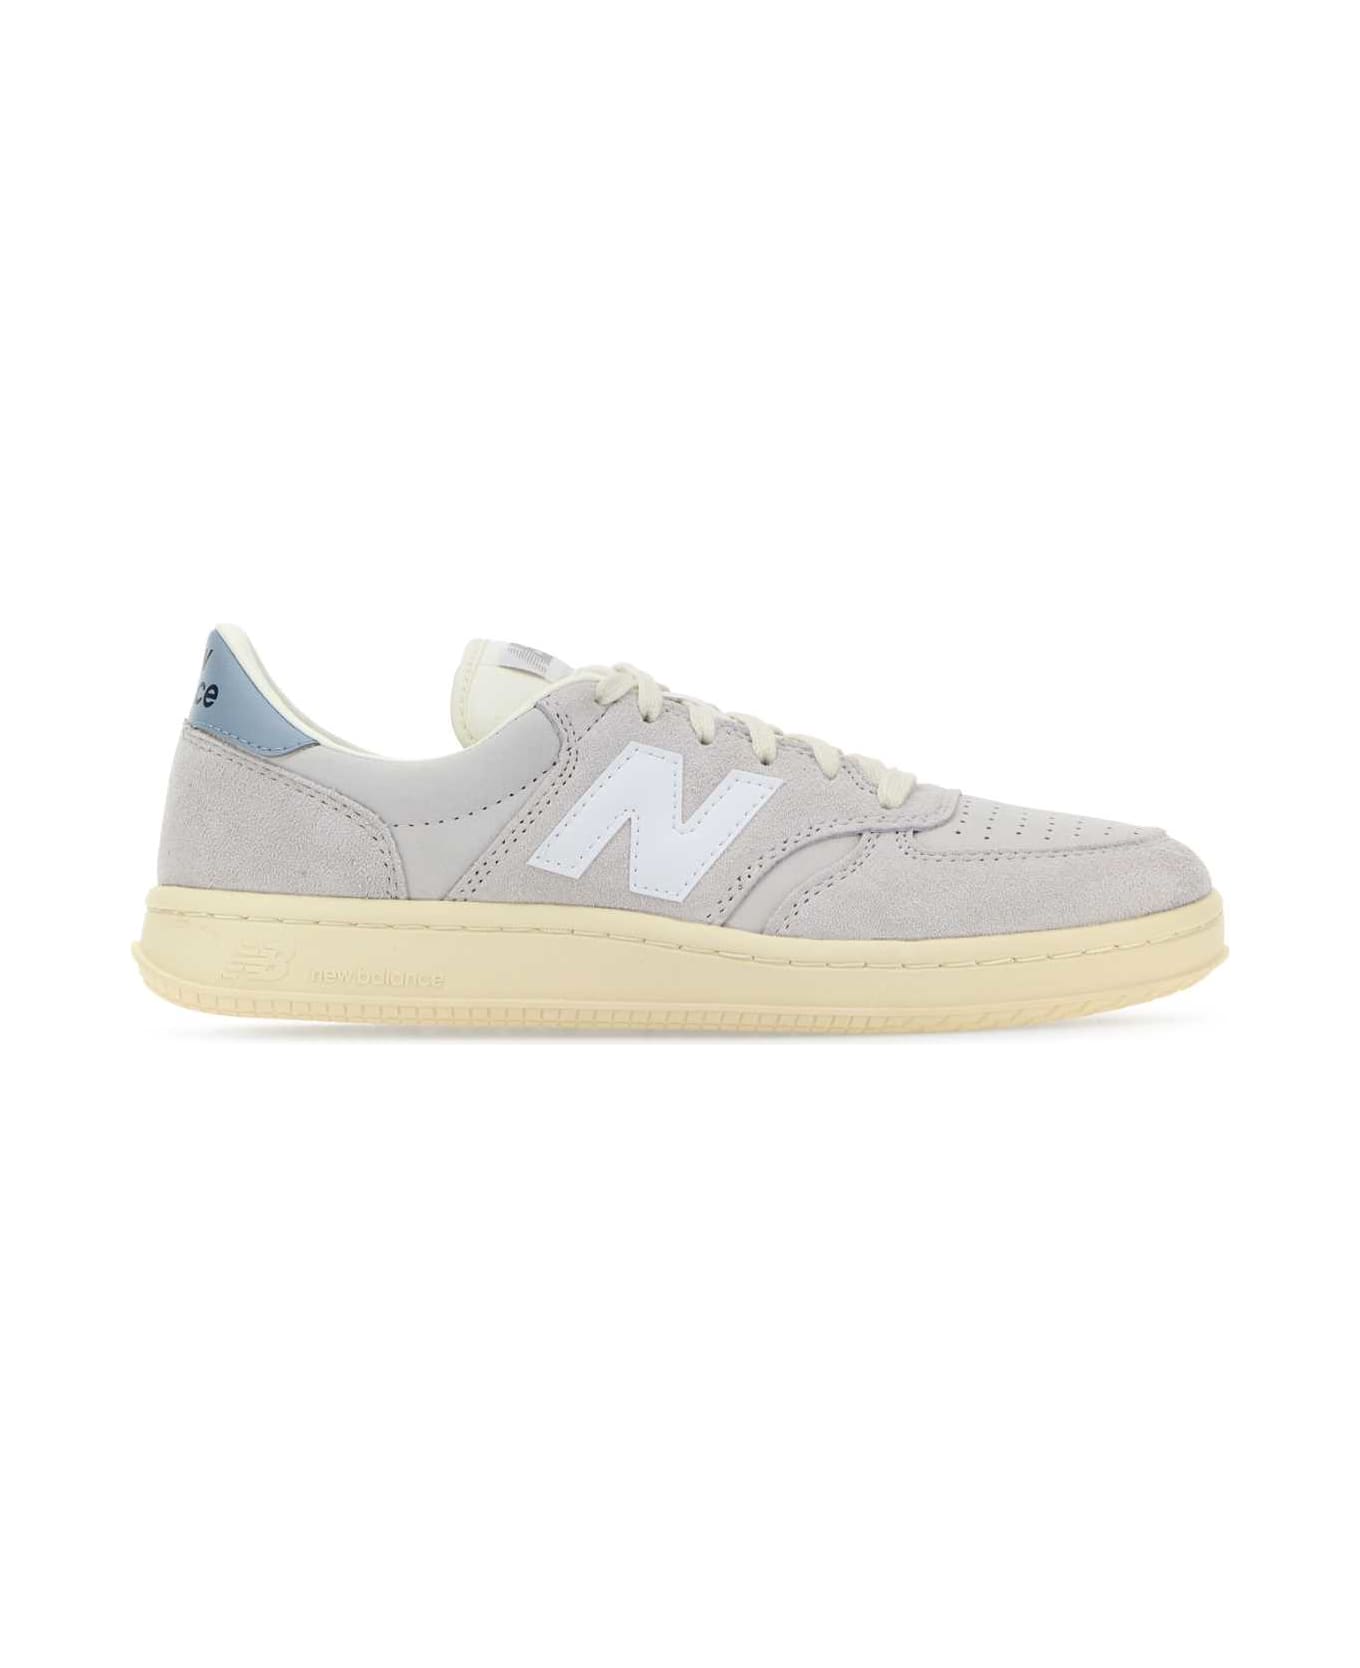 New Balance Light Grey Suede T500 Sneakers - OFFWHITE